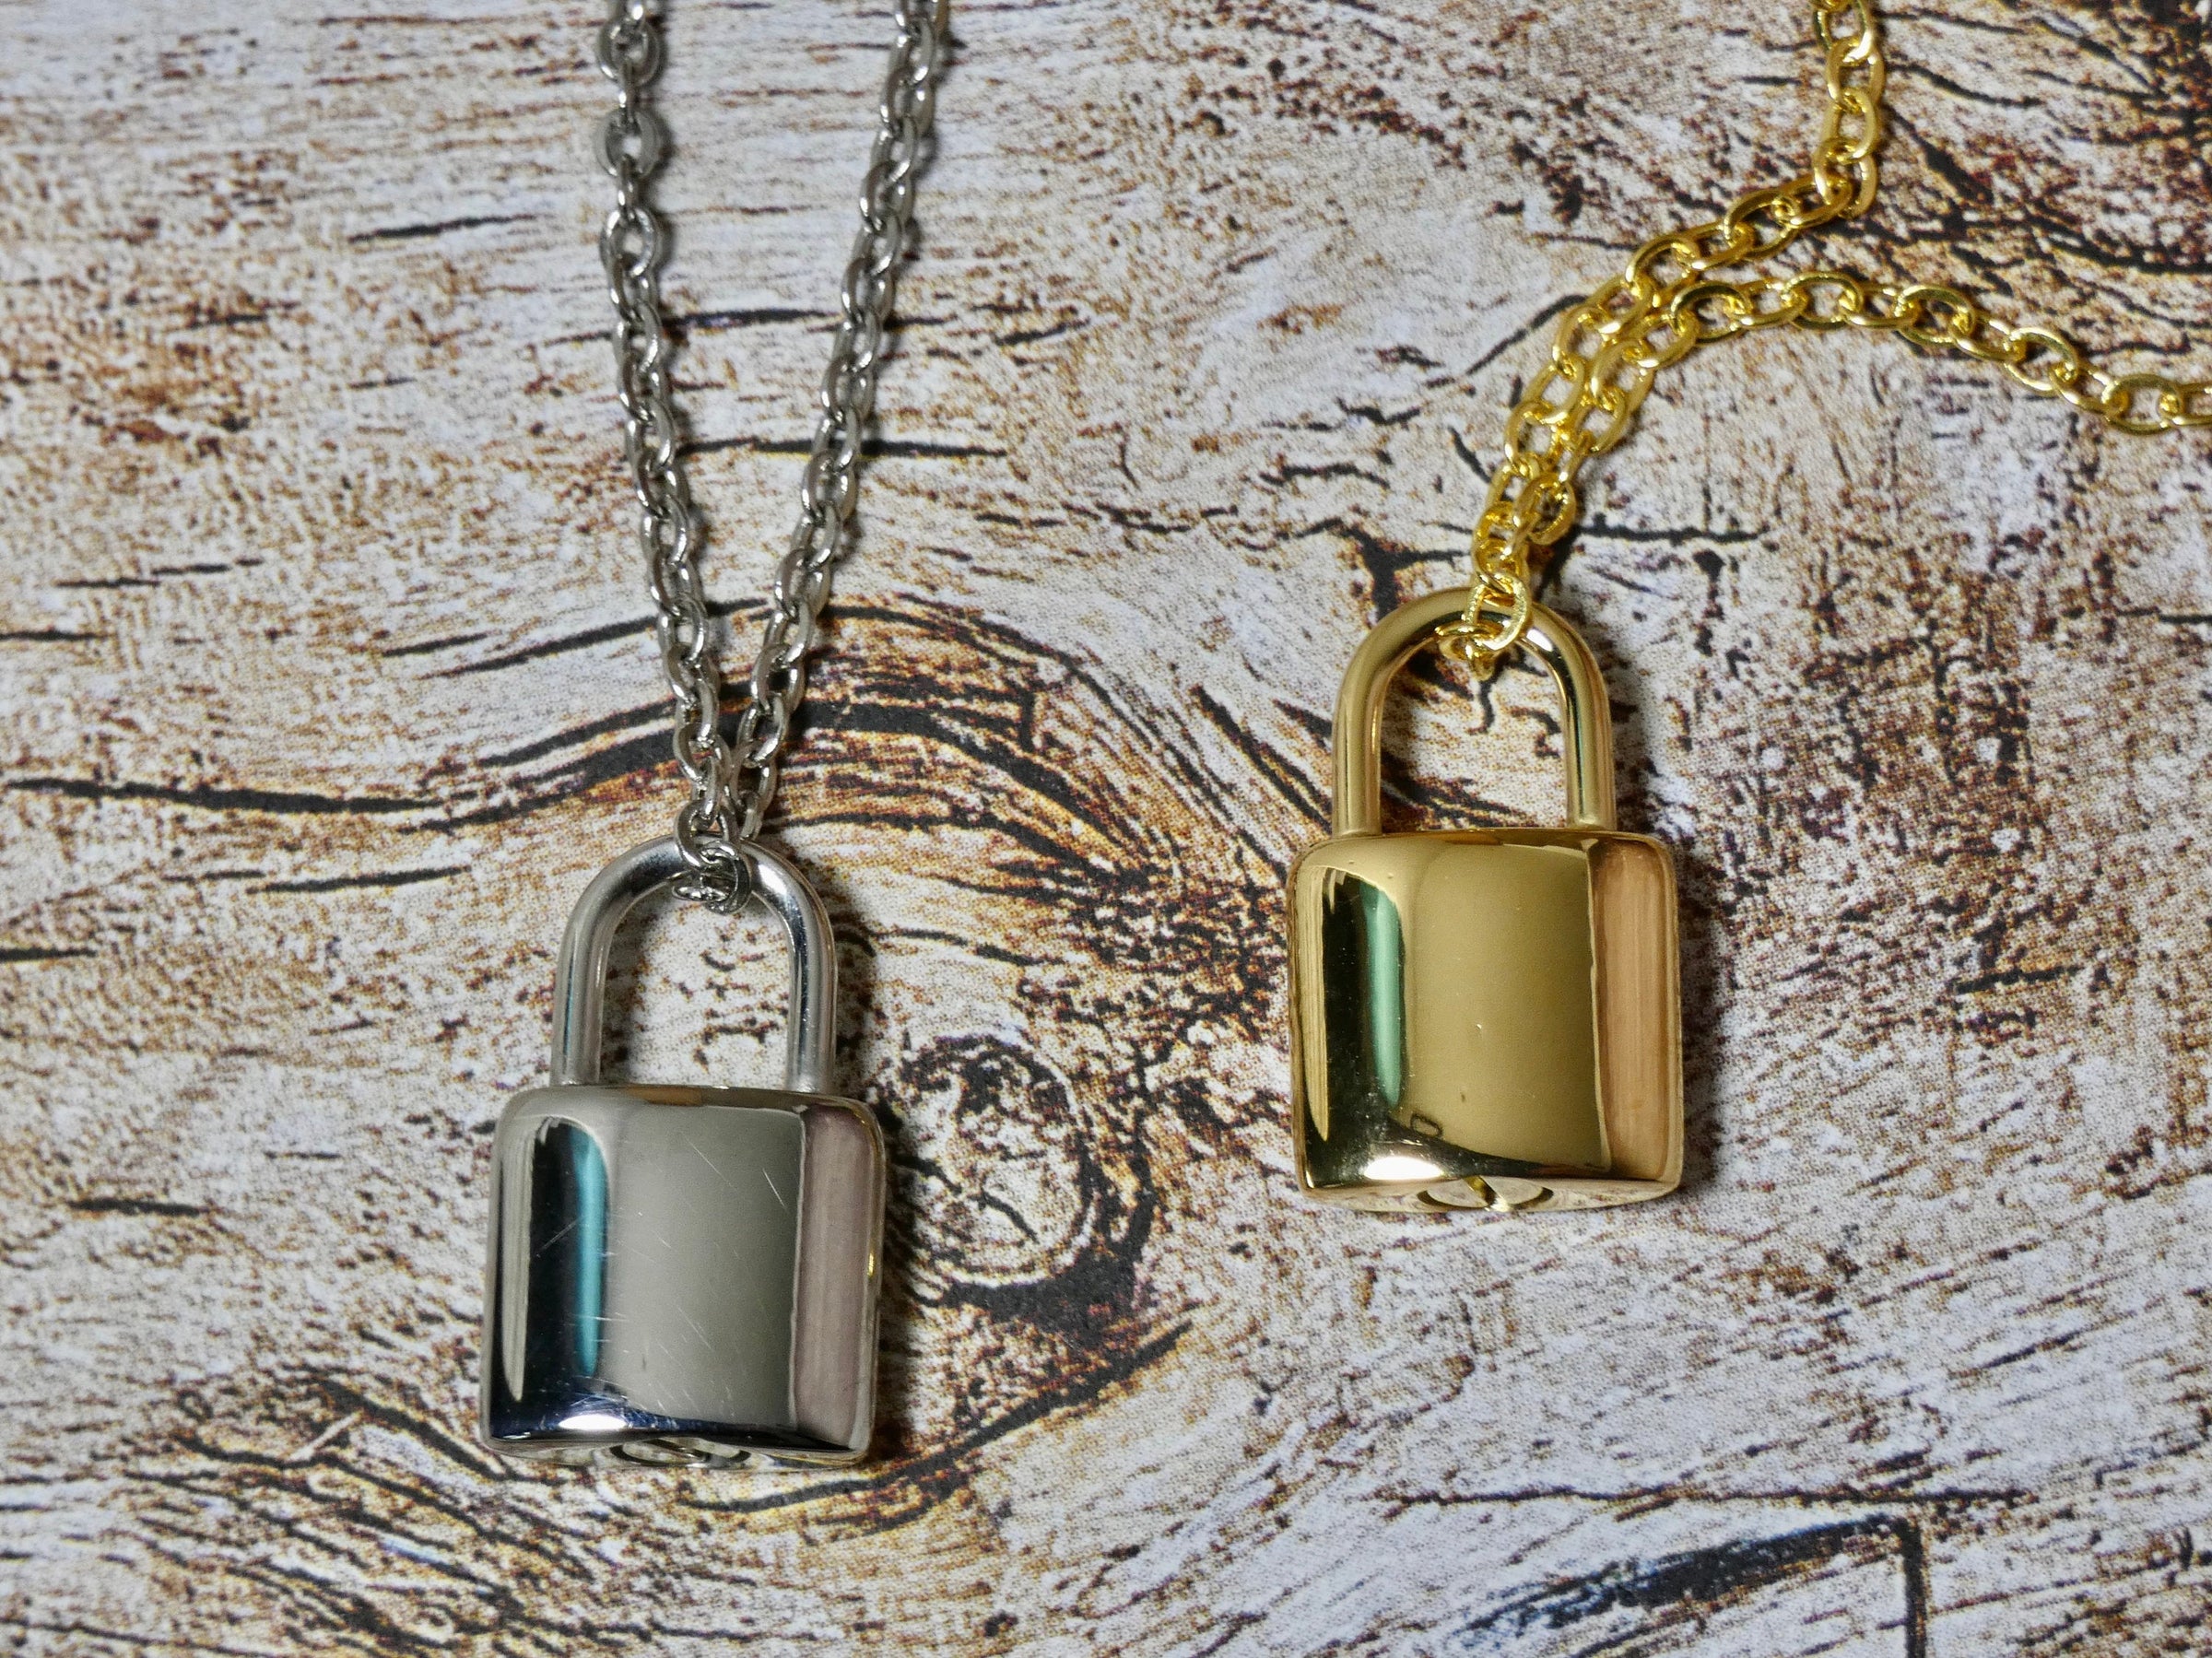 Padlock Necklace, A Very Small Urn Necklace, Cremation Pendant for Human or Pet Ashes, Two Sizes Available Medium Padlock / Silver